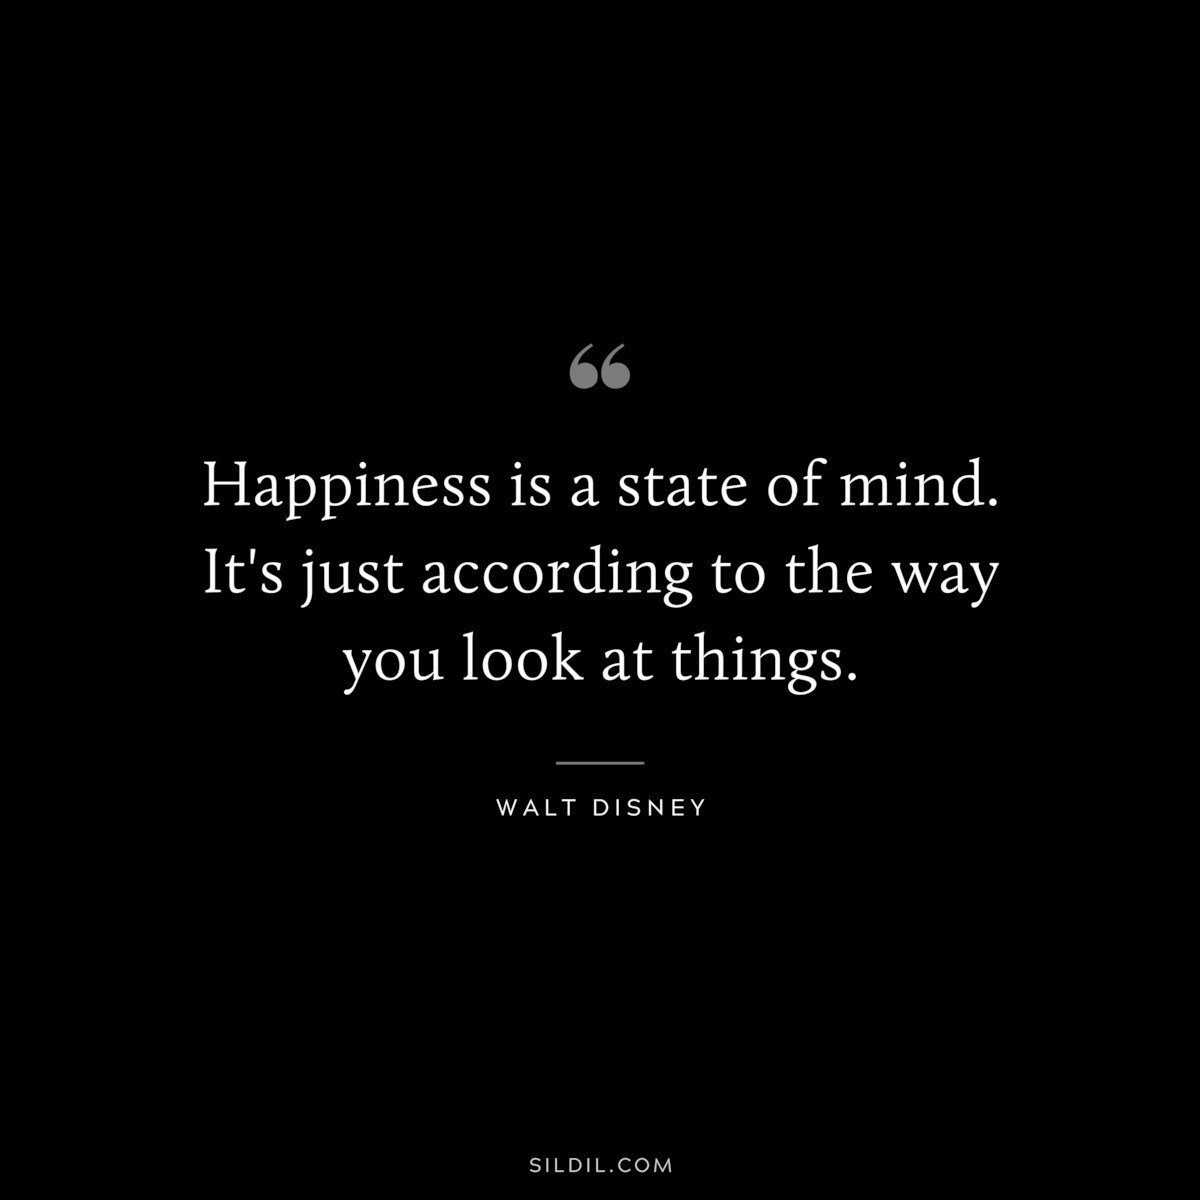 Happiness is a state of mind. It's just according to the way you look at things. ― Walt Disney